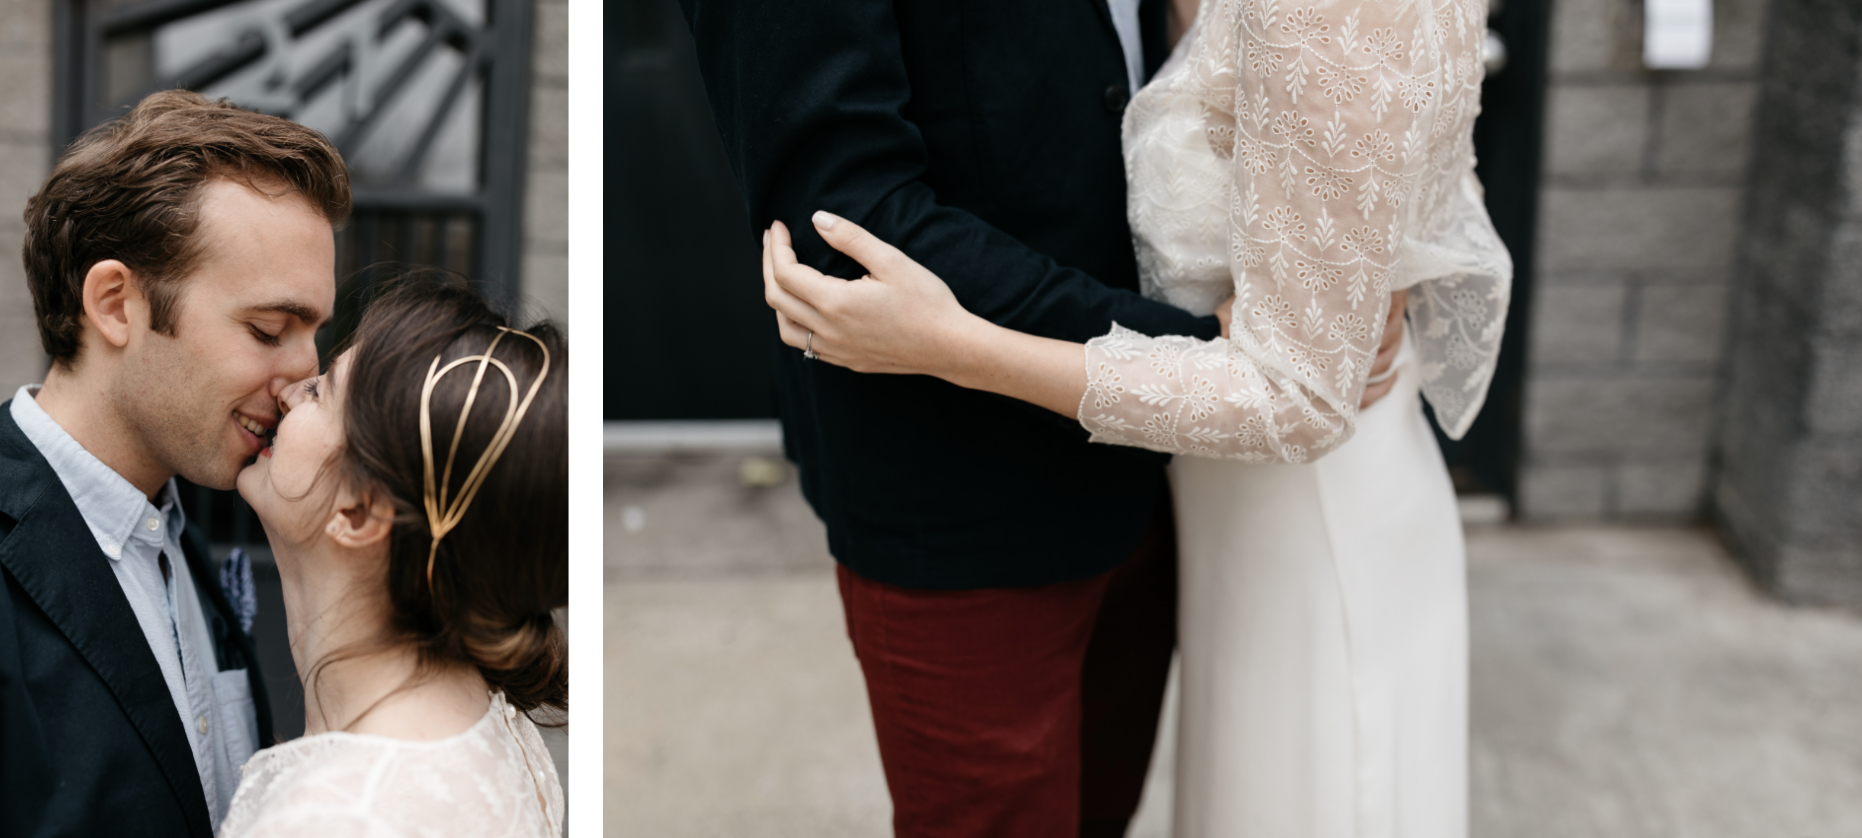 A romantic Industrial Elopement Wedding at The Foundry The Creatives Loft Wedding Planning Jean Laurent Gaudy Wedding Photographer